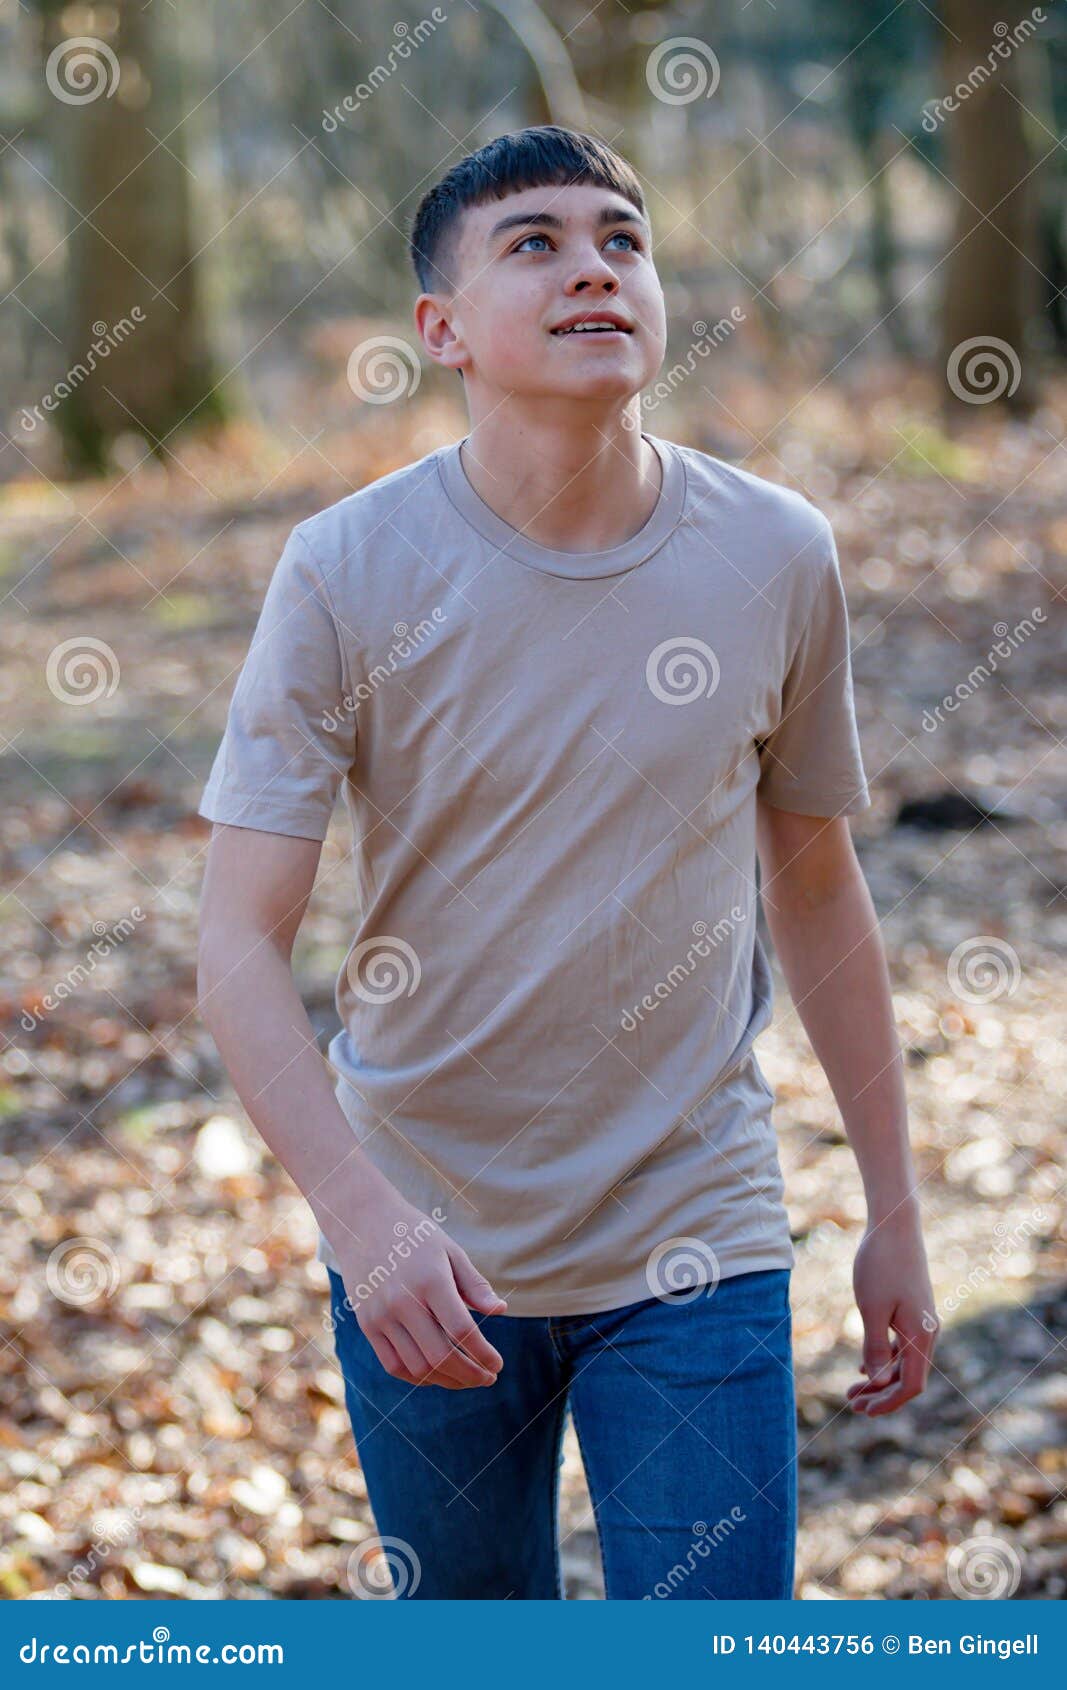 Teenage Boy Outside on a Bright Spring Day Stock Photo - Image of ...